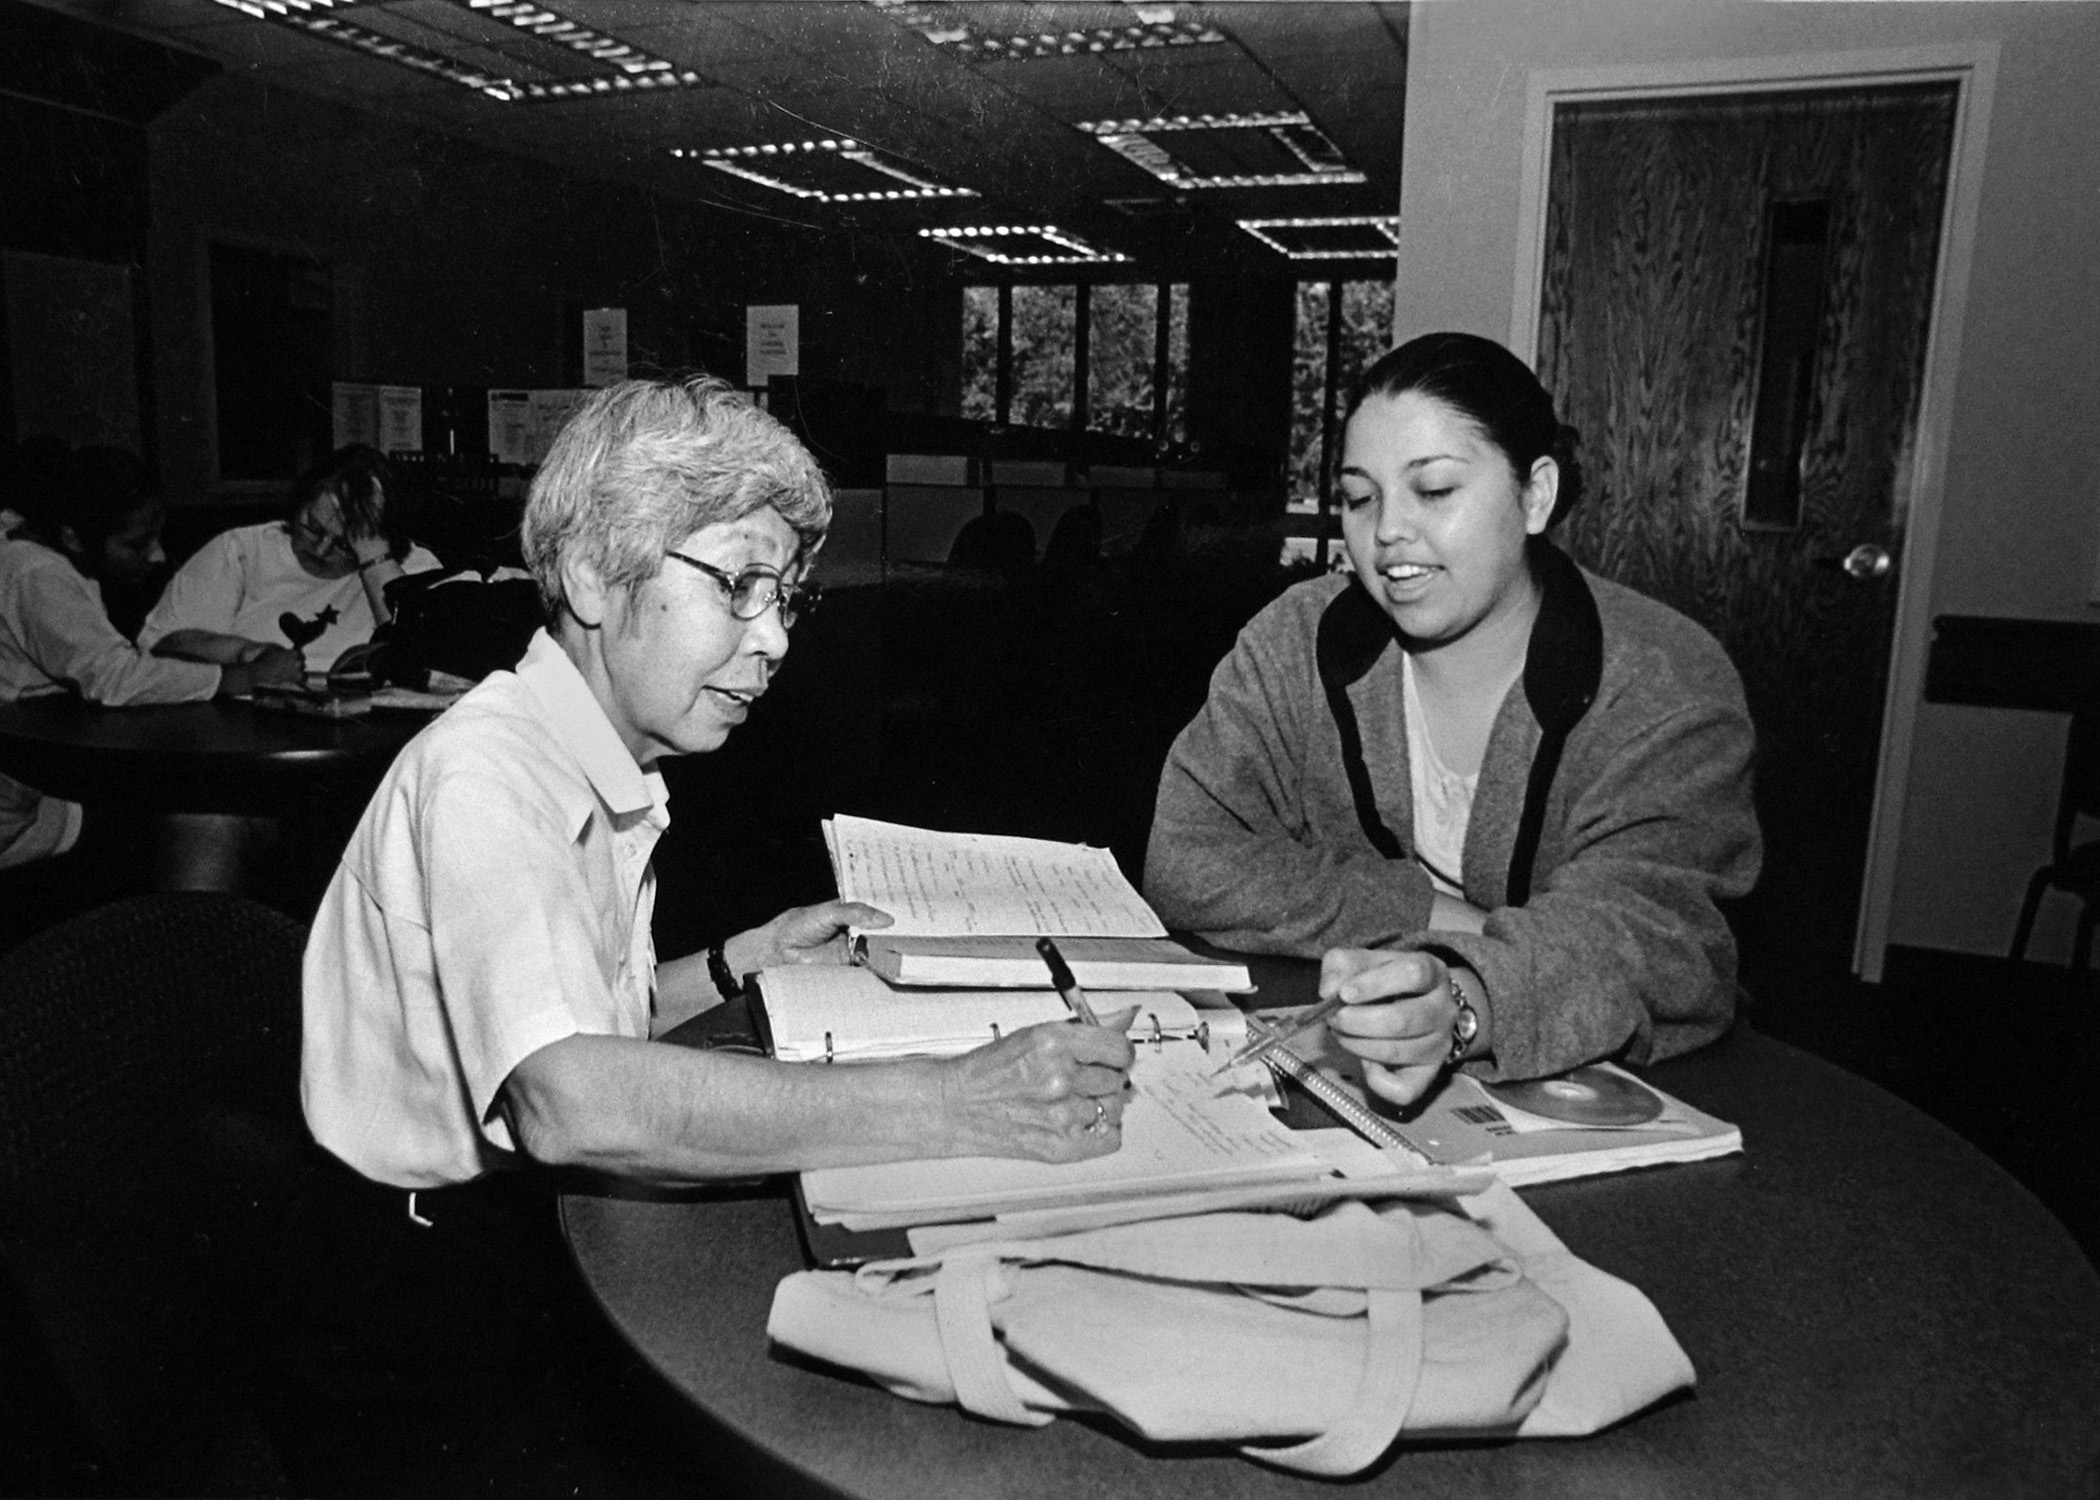 City College's oldest student, Heidi Juchnik, works with a tutor in 2000. Juchnik, who died recently at the age of 86, earned two AA degrees and continued taking classes for enrichment. l Photo by David Steutel 